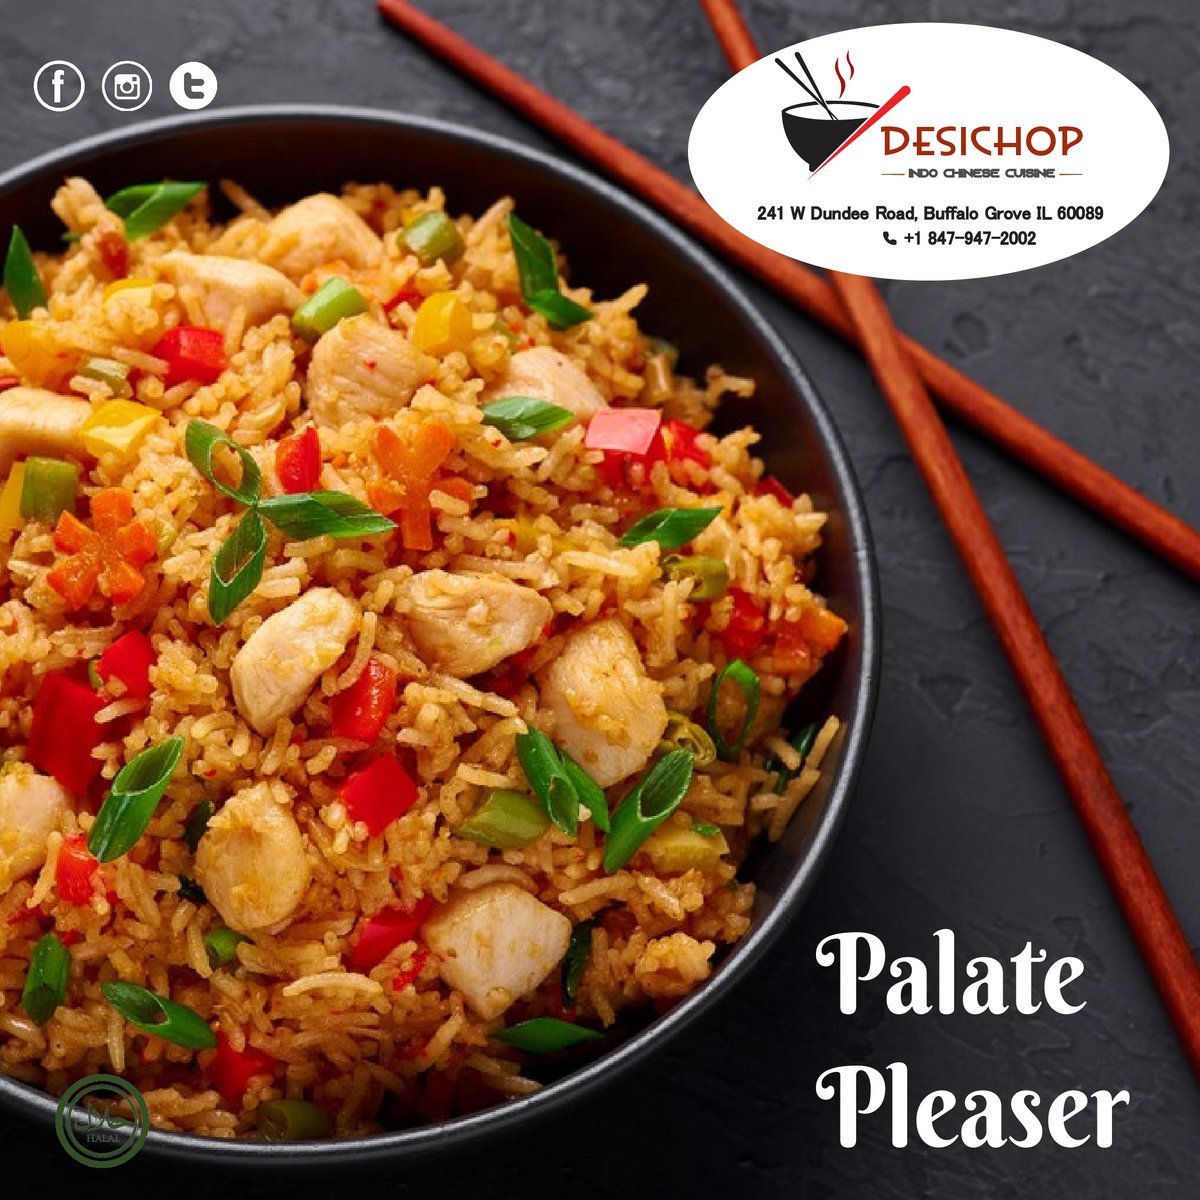 Heavenly Harmony
#ChickenFriedRice
#AsianFlavors
#FoodieFavorites
#DeliciousDish
#RiceLovers
#FoodFusion
#YummyEats
#FlavorfulFeast
#WokCooking
#TastyTreats